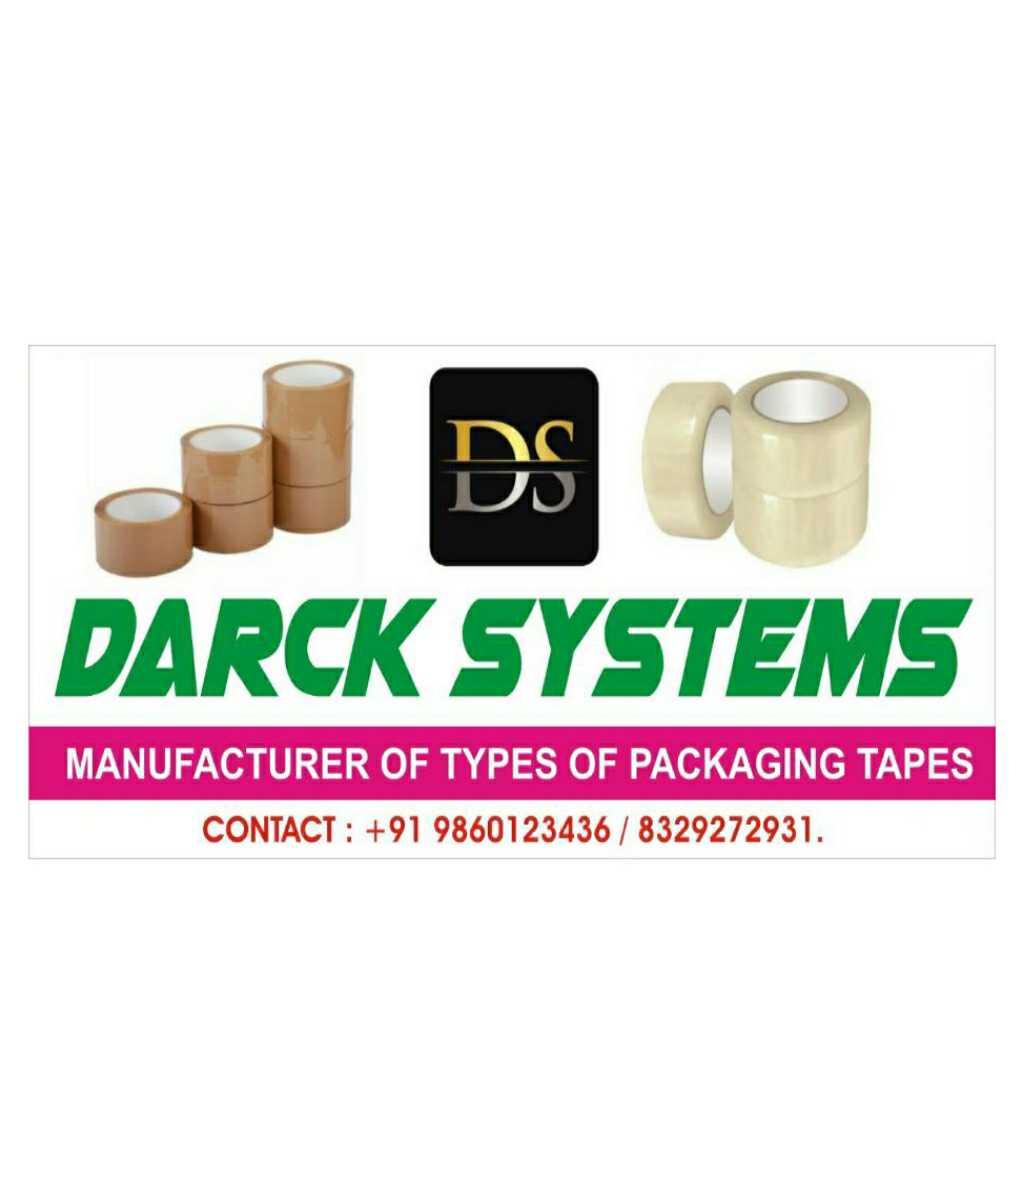 DARCK SYSTEMS